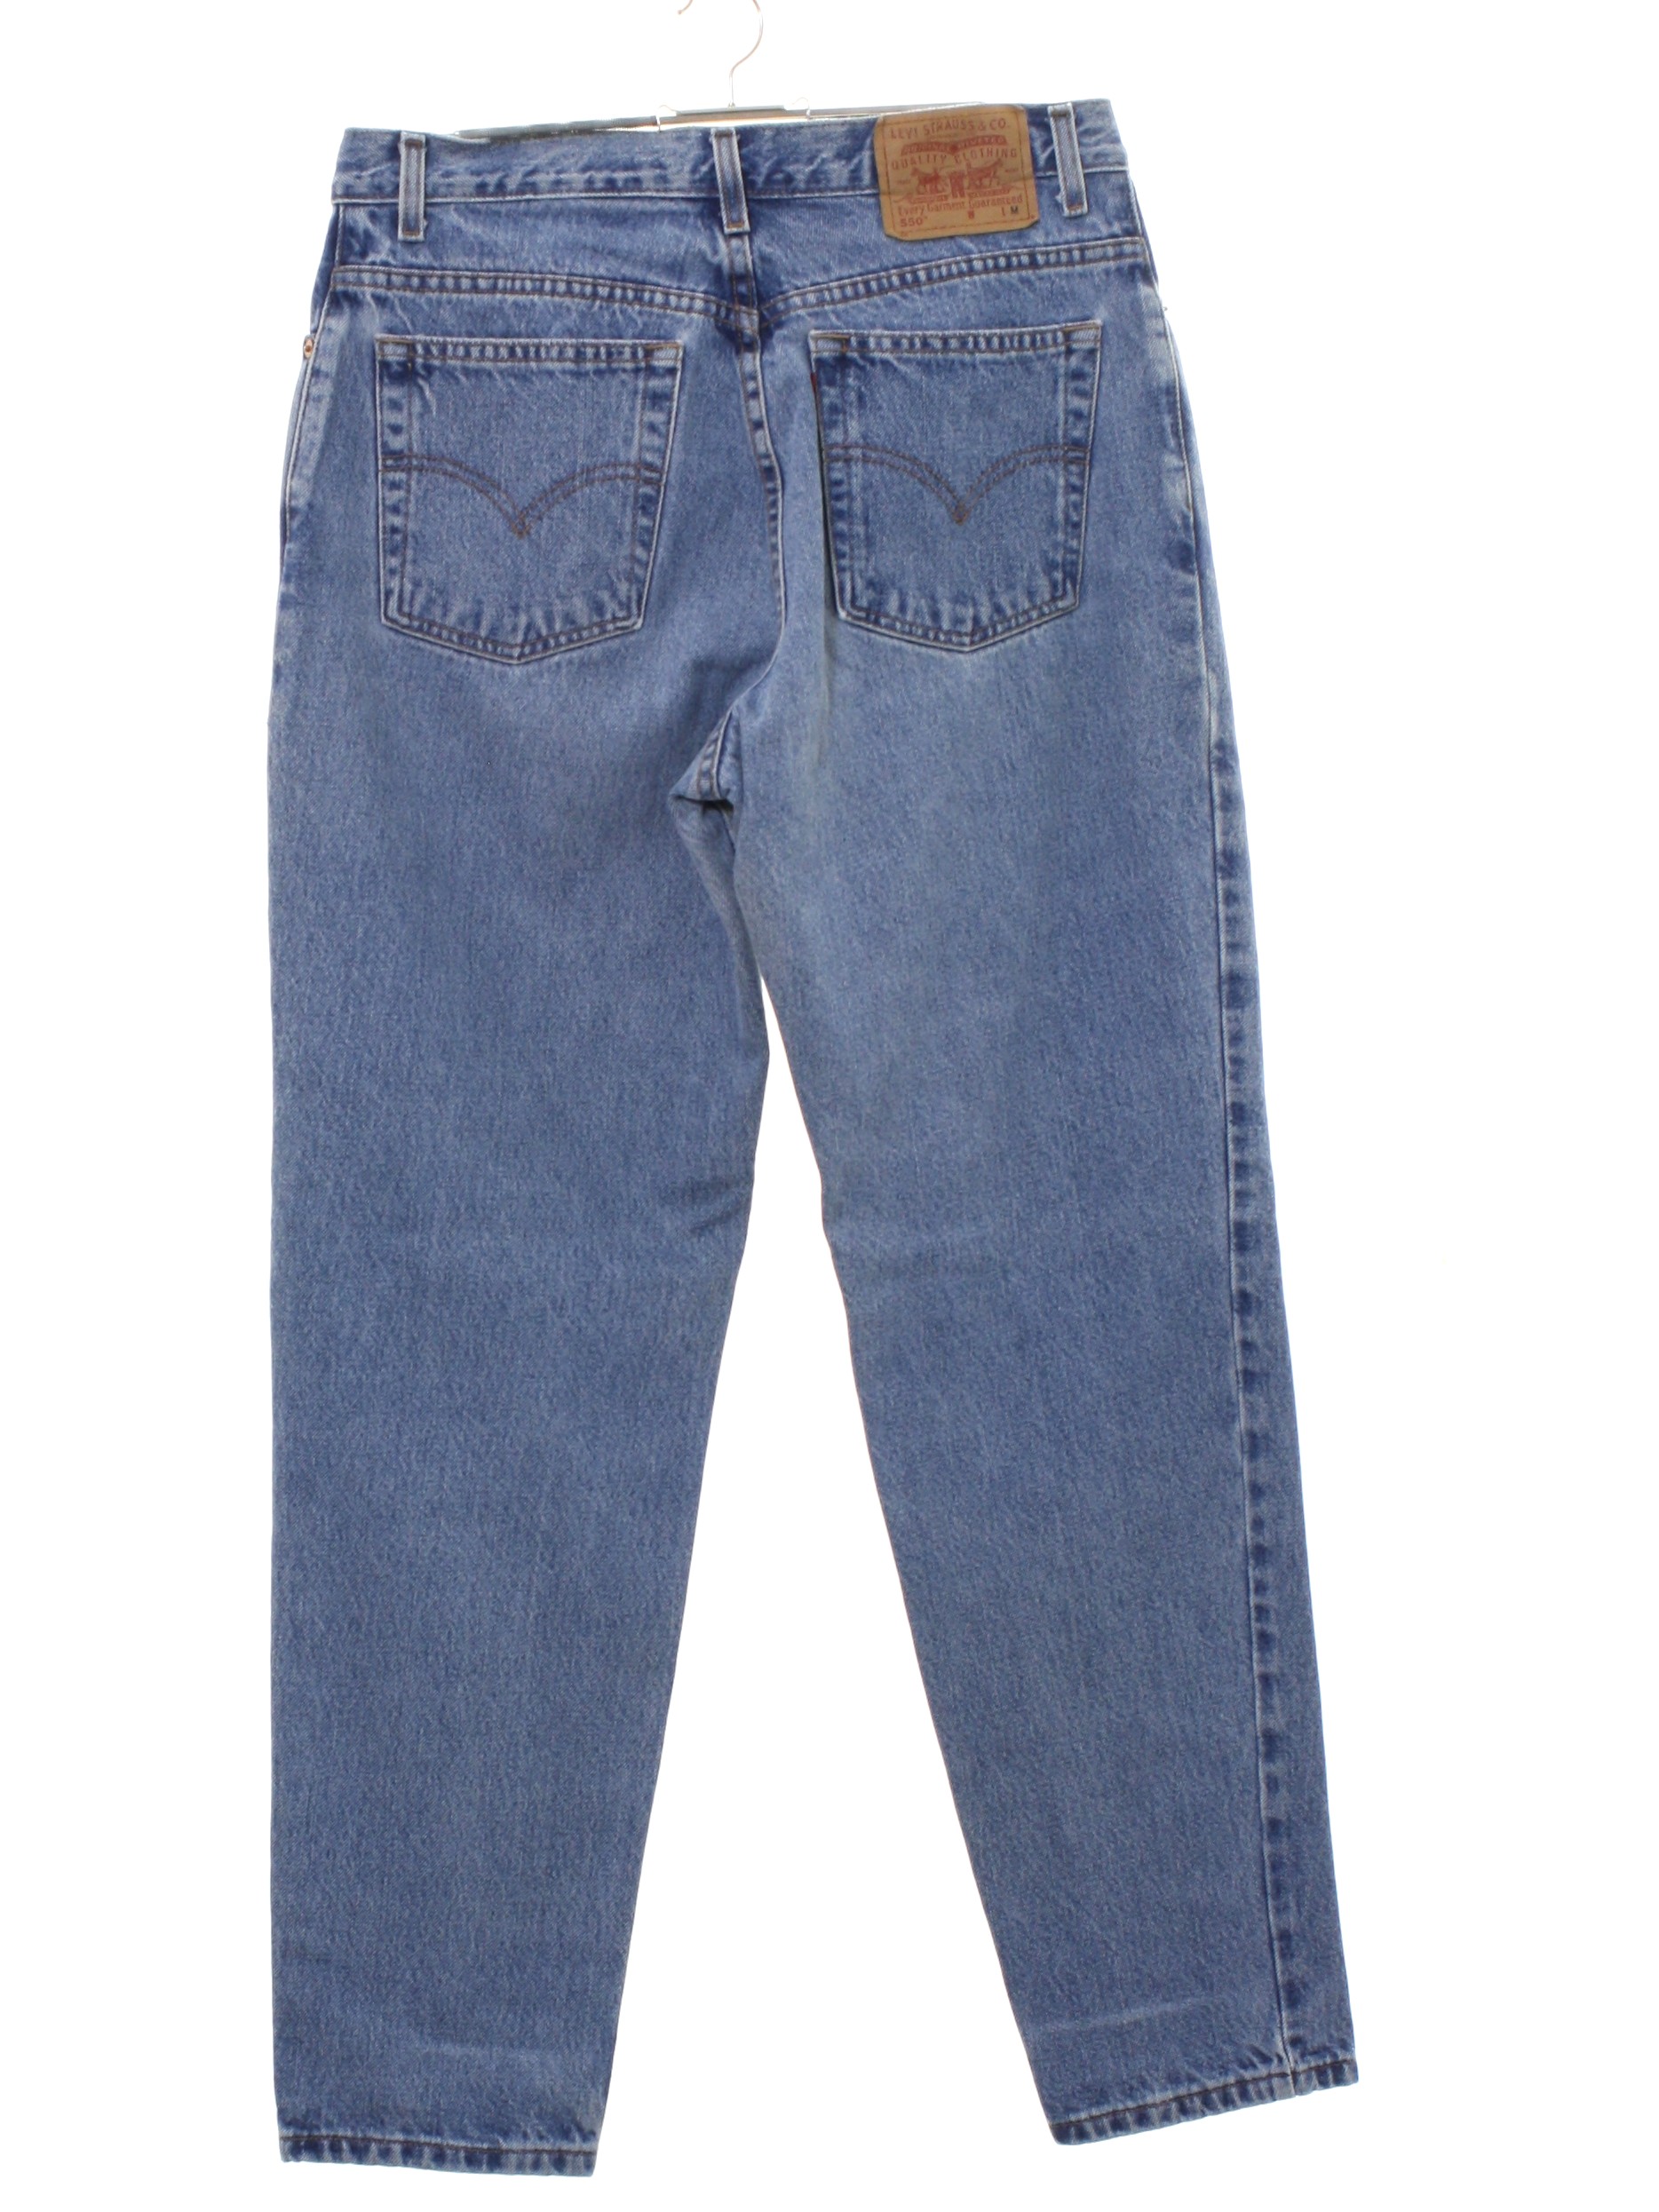 Vintage 90s Pants: Late 90s -Levis 550- Womens slightly faded blue ...